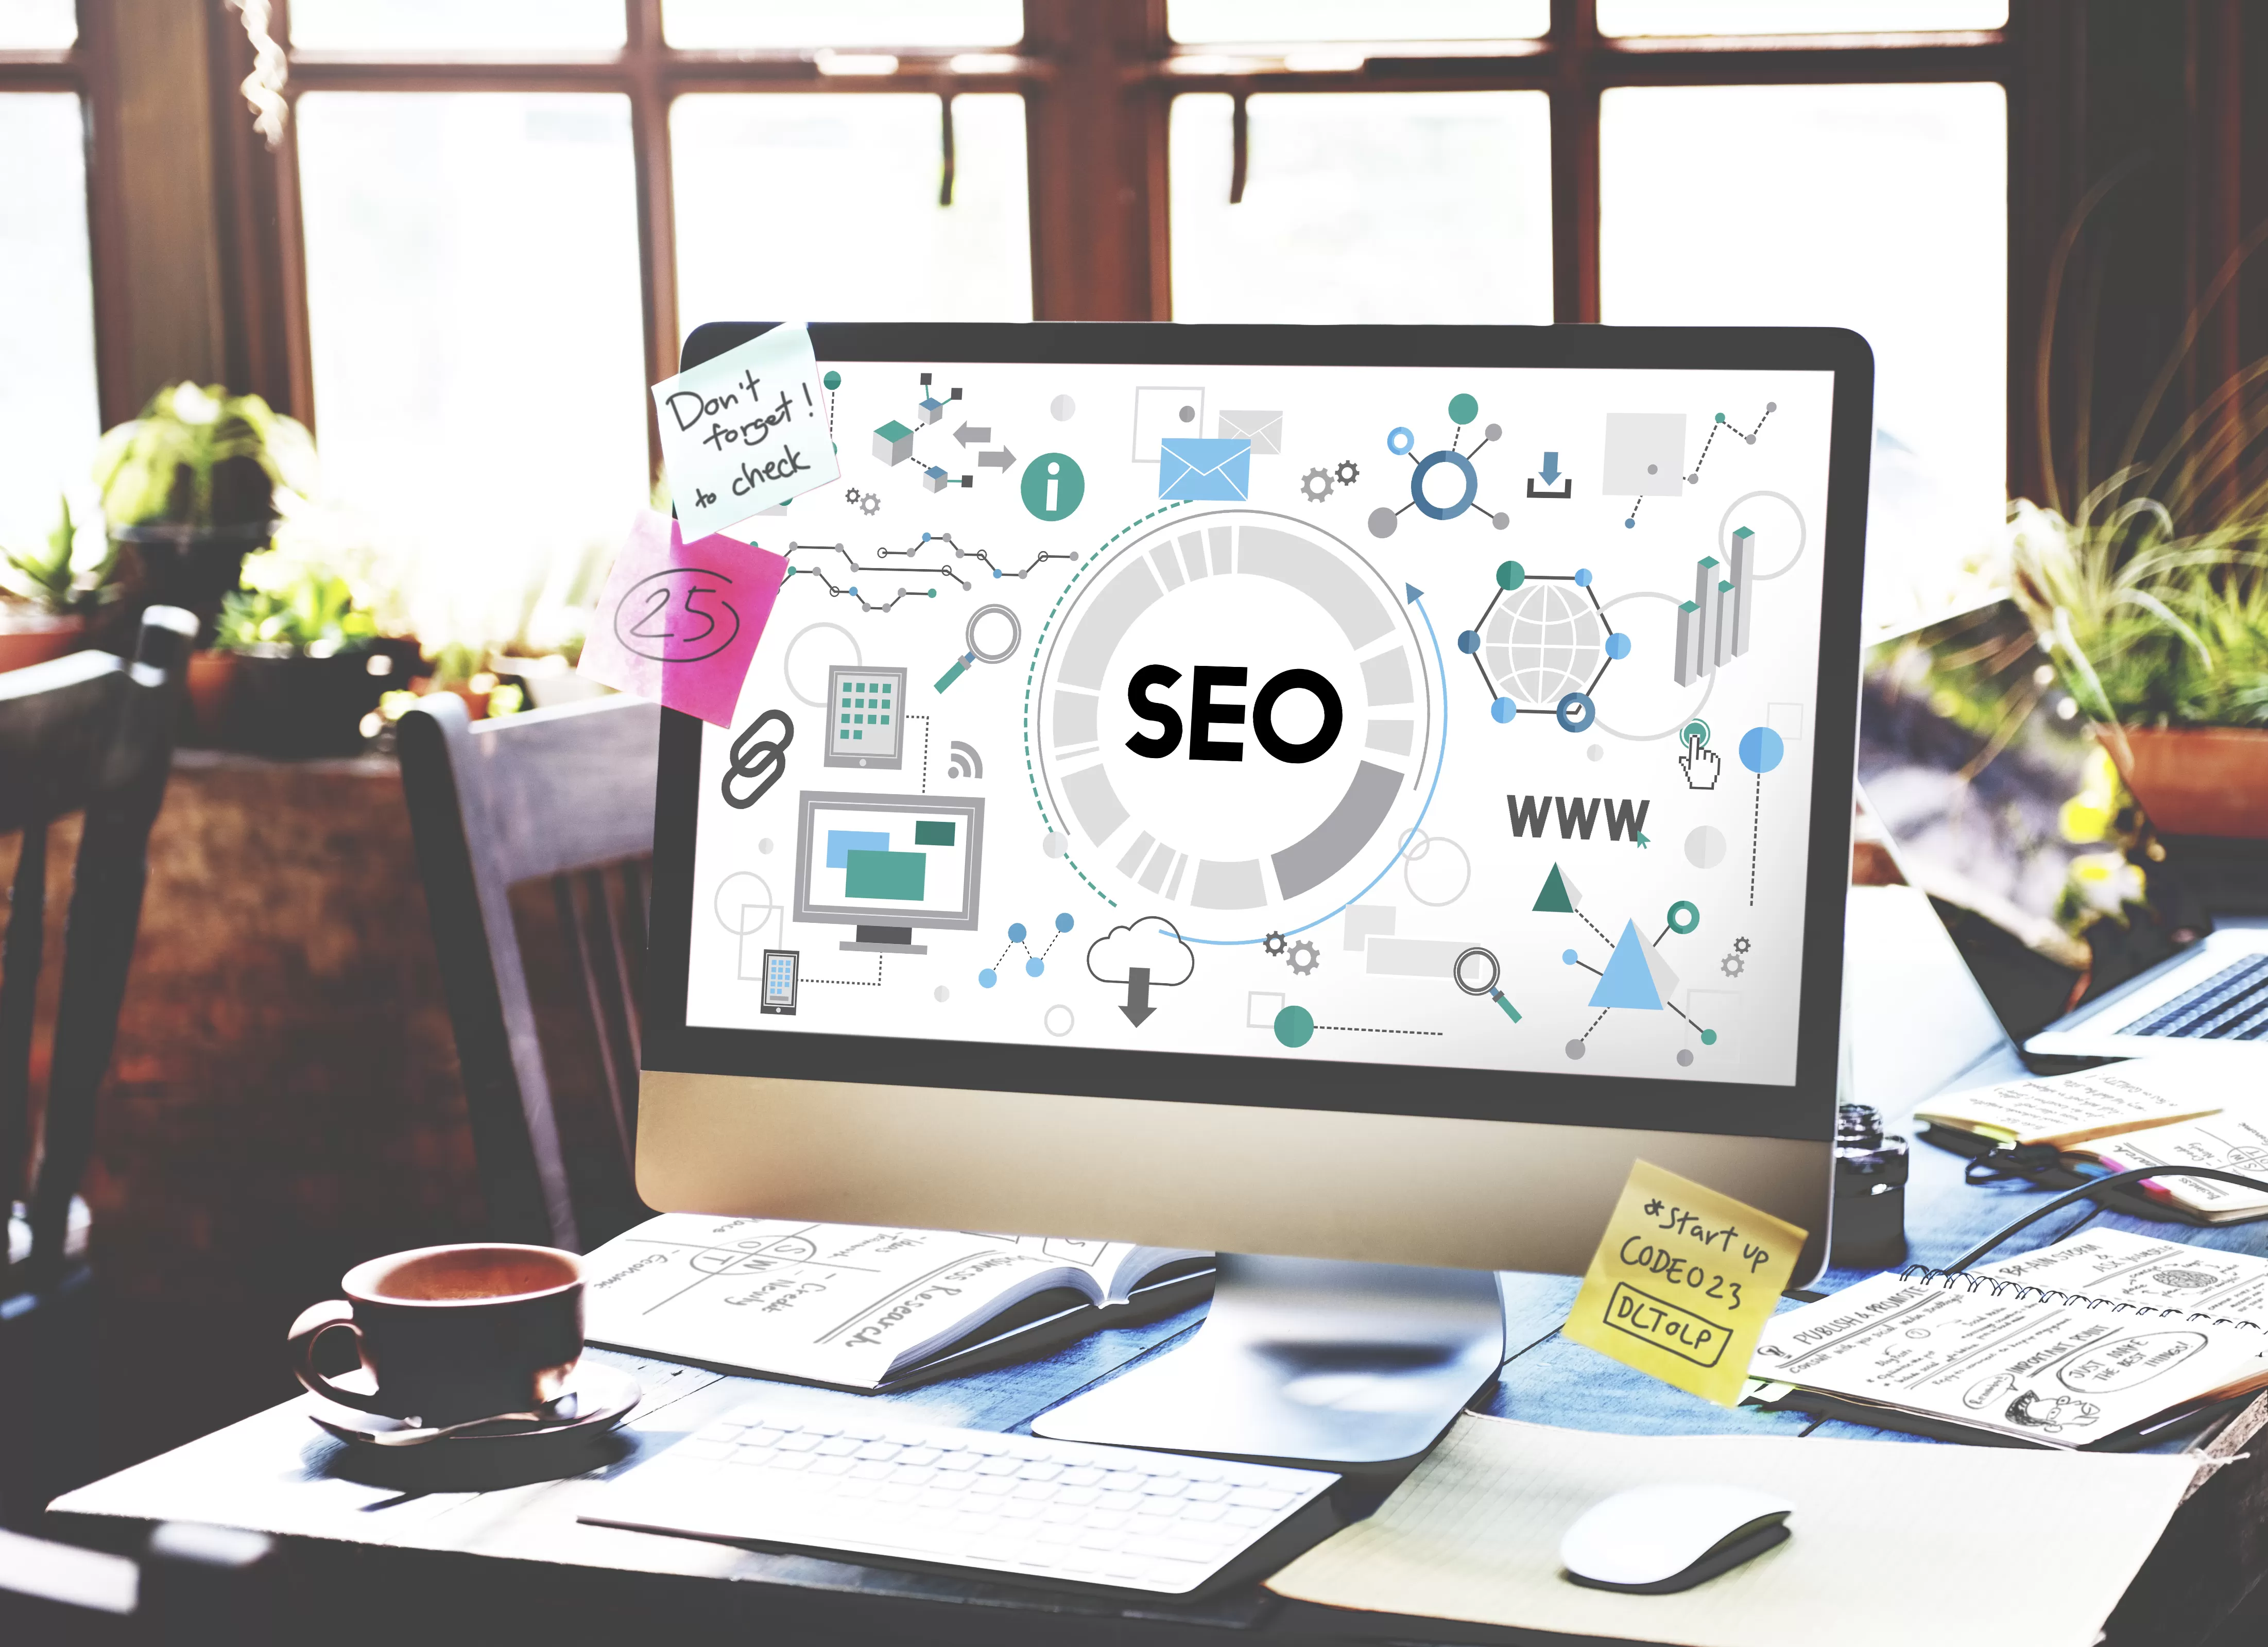 What To Look For In An SEO Firm